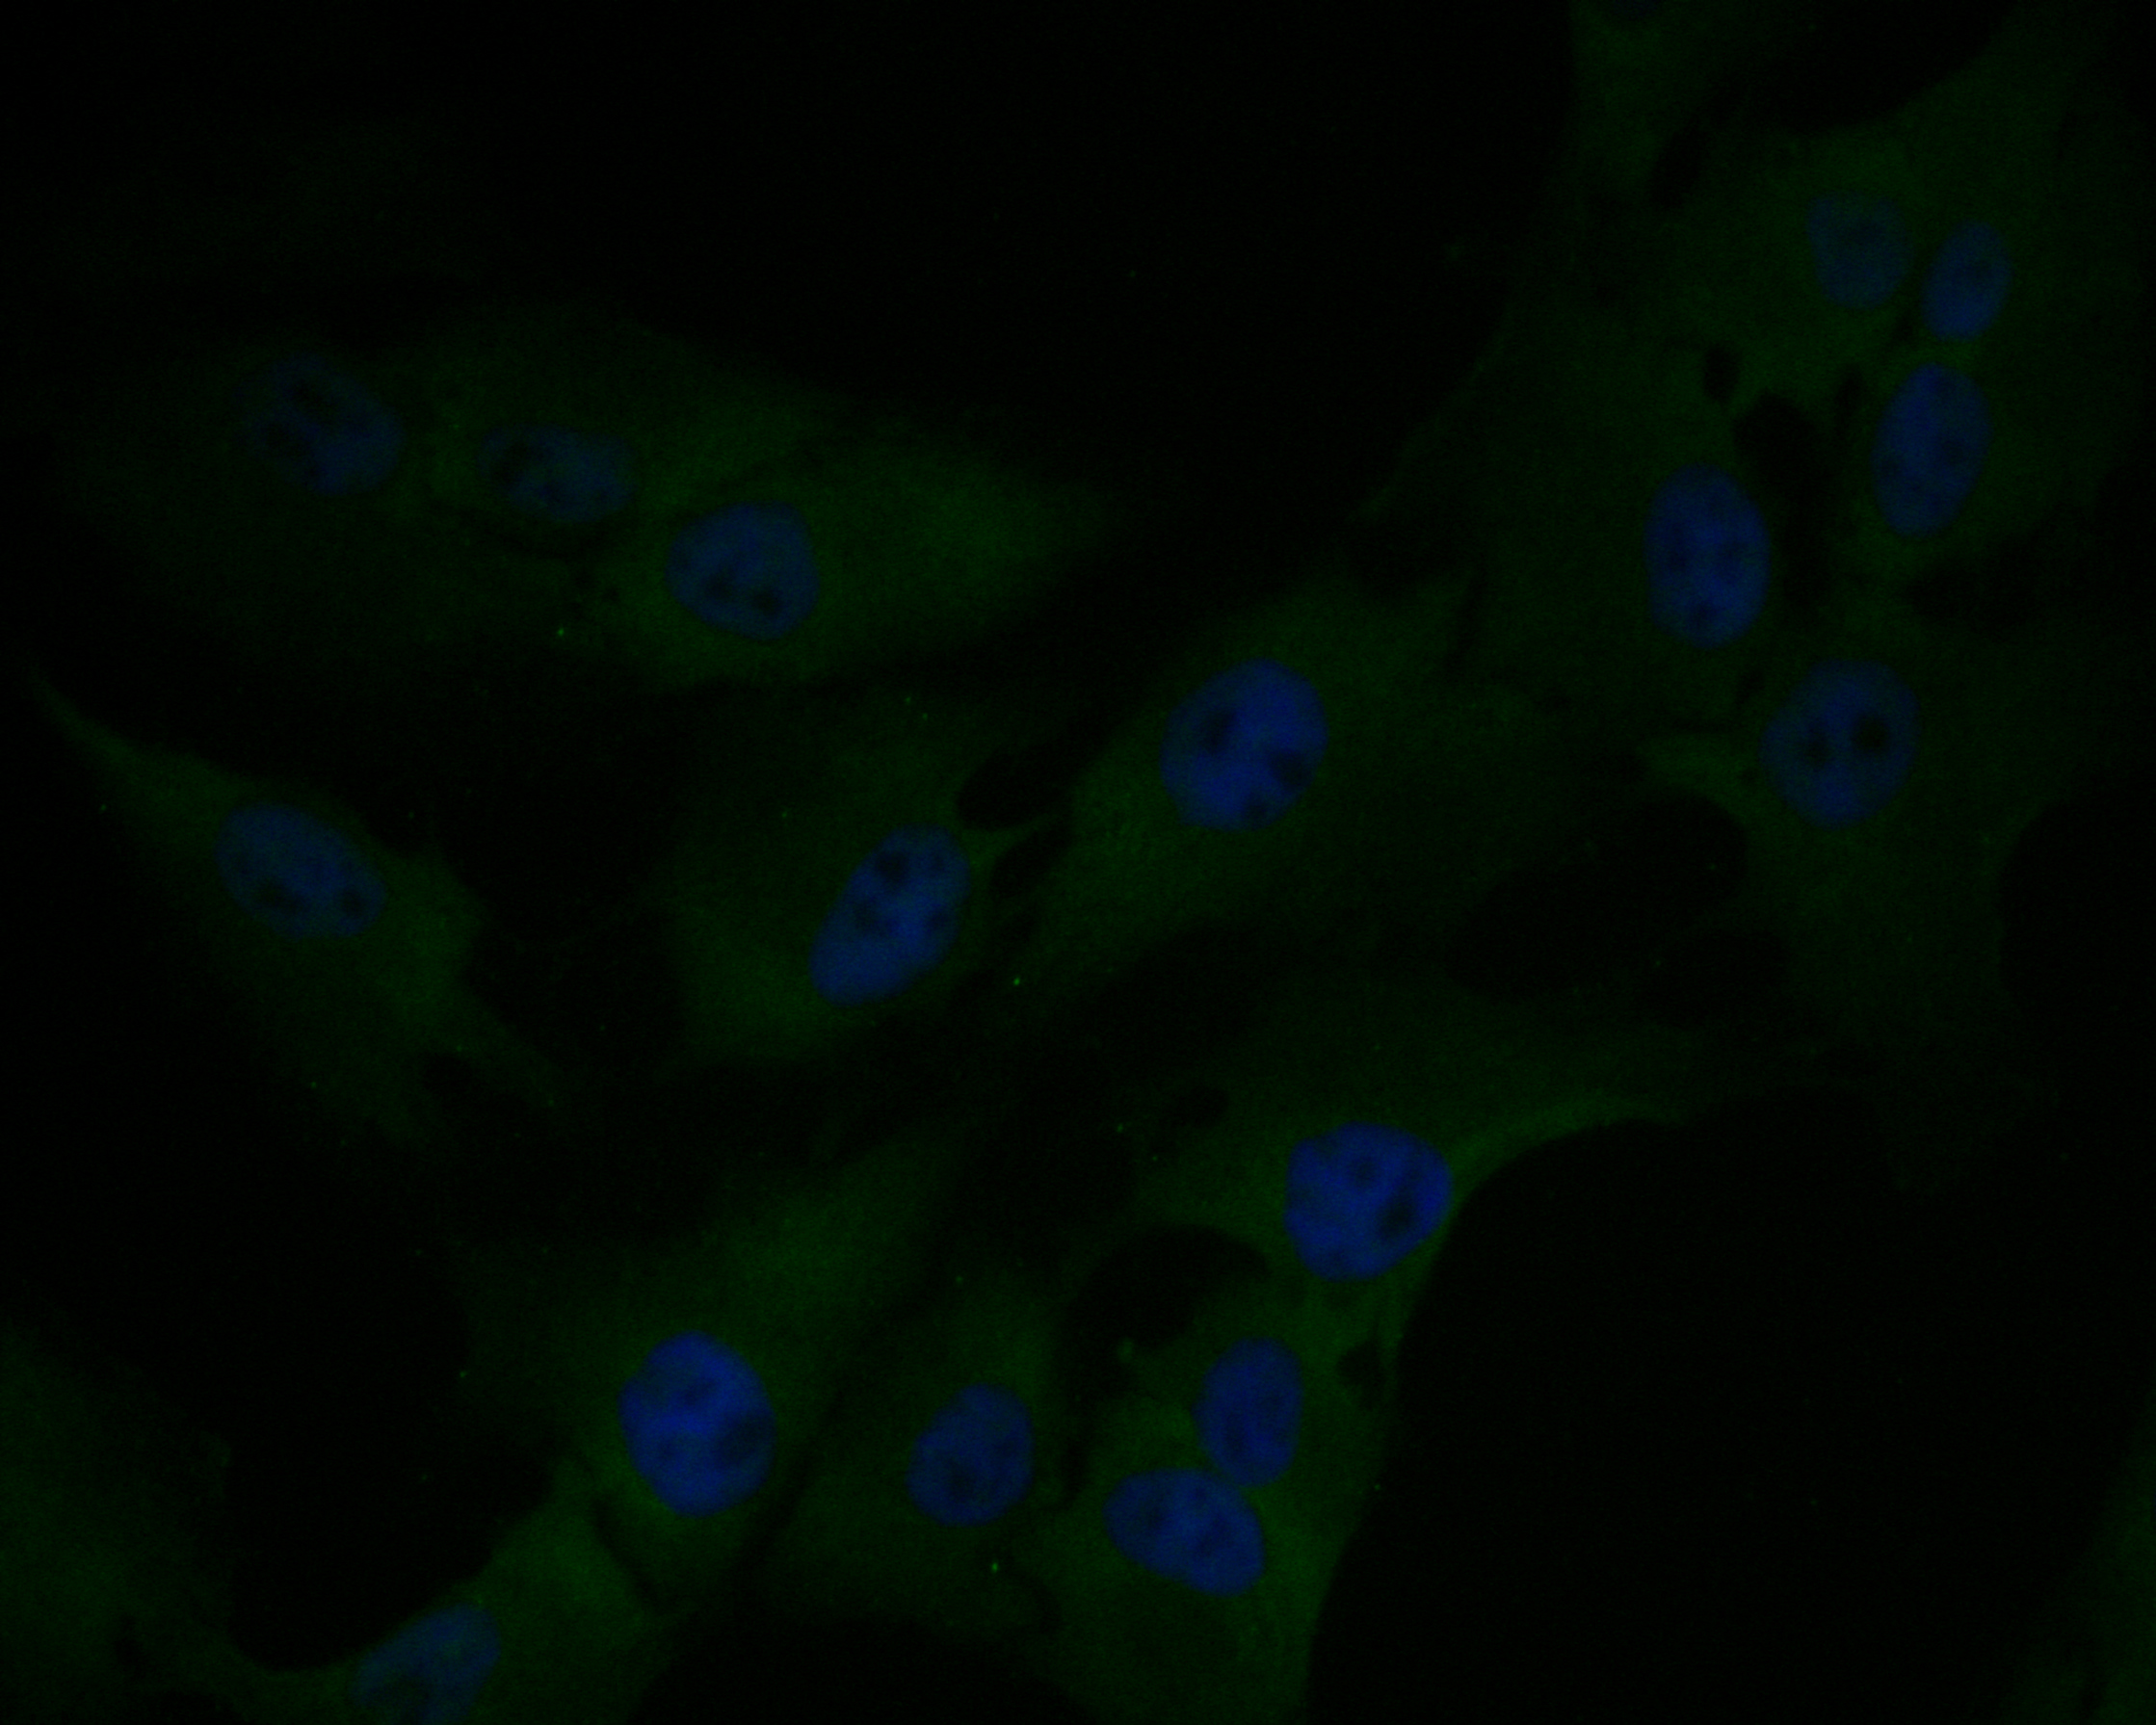 ICC staining of EMC10 in MG-63 cells (green). Formalin fixed cells were permeabilized with 0.1% Triton X-100 in TBS for 10 minutes at room temperature and blocked with 1% Blocker BSA for 15 minutes at room temperature. Cells were probed with the primary antibody (ER1902-08, 1/200) for 1 hour at room temperature, washed with PBS. Alexa Fluor®488 Goat anti-Rabbit IgG was used as the secondary antibody at 1/1,000 dilution. The nuclear counter stain is DAPI (blue).